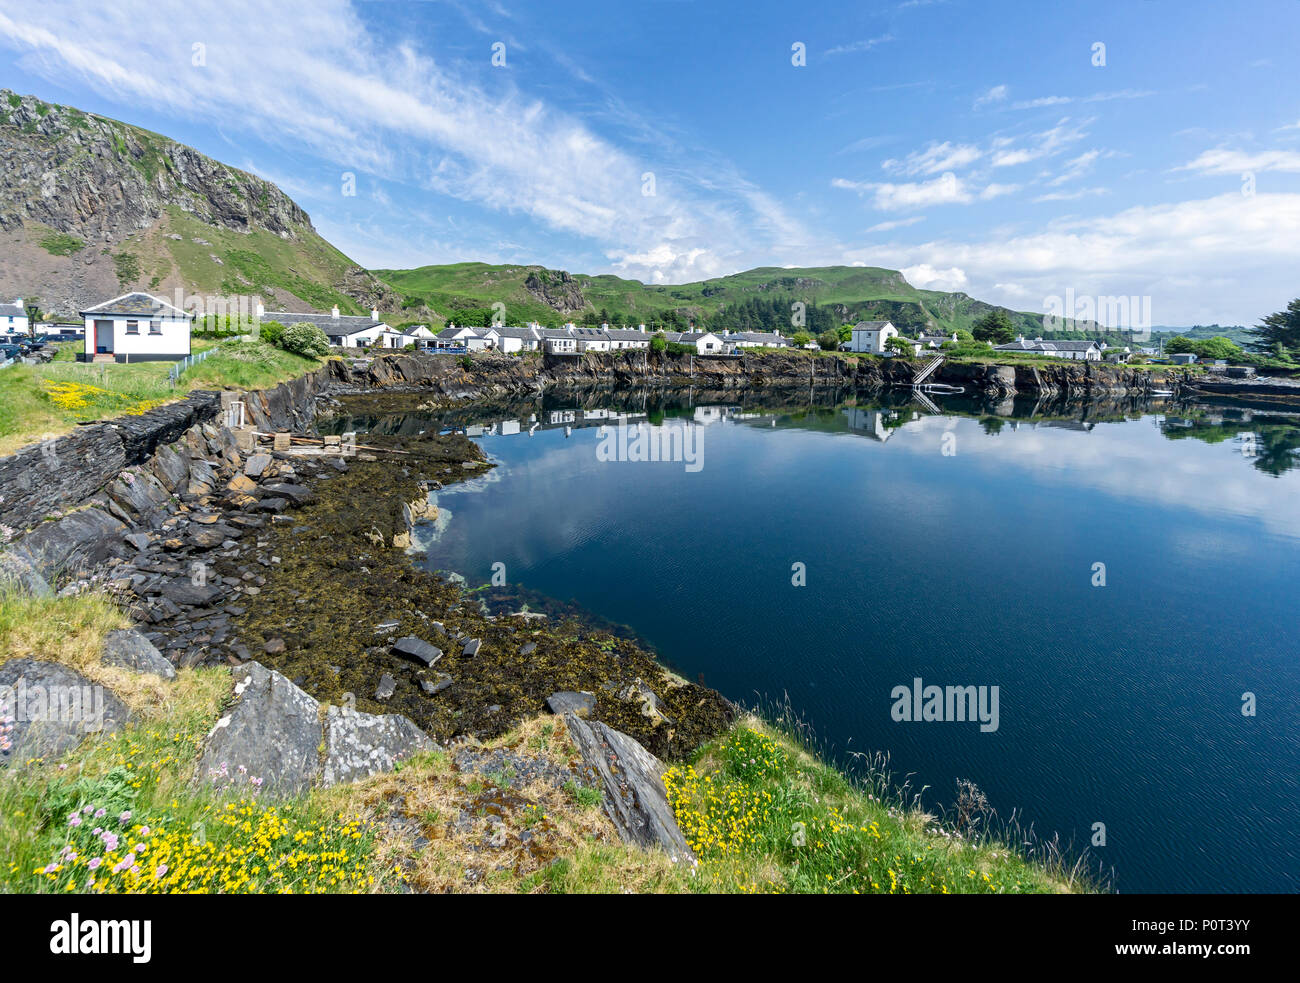 Disused old slate mine at village of Easdale on the island of Seil south of  Oban Argyll & Bute Scotland UK Stock Photo